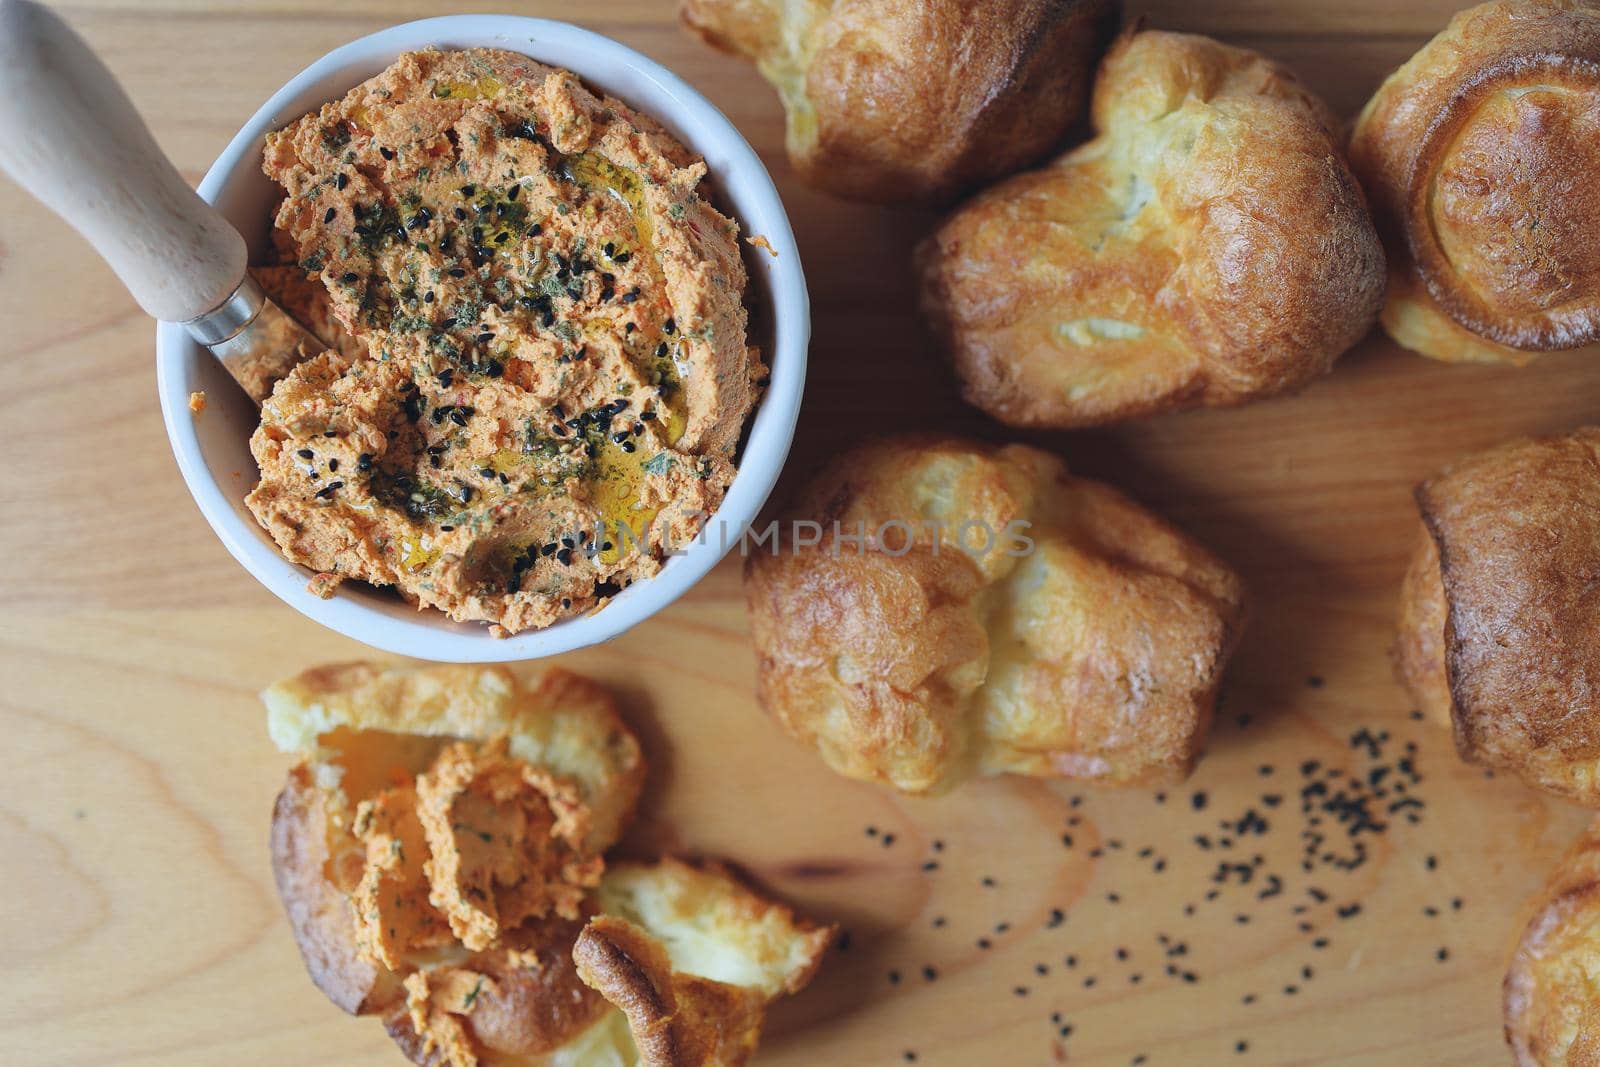 ricotta dip with sun-dried tomatoes and baked paprika in a ceramic white bowl and homemade popovers, which is a puffed, airy, and eggy hollow roll, is fresh from the oven by Proxima13